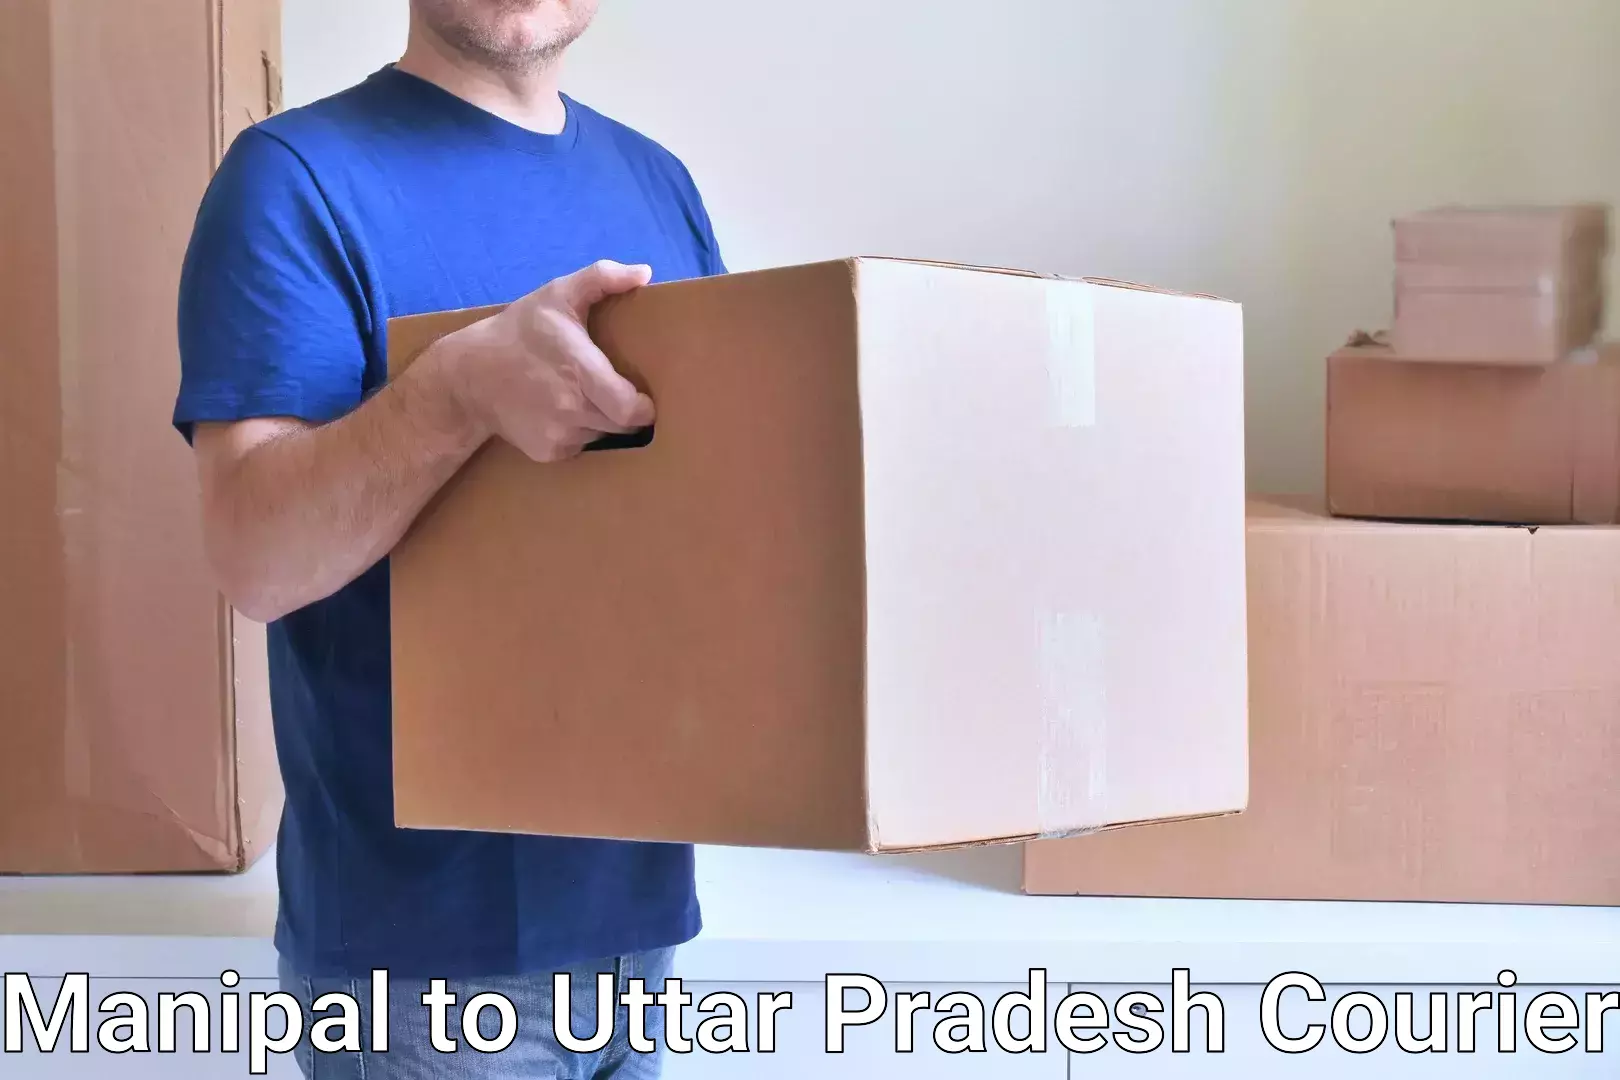 Courier membership Manipal to Allahabad